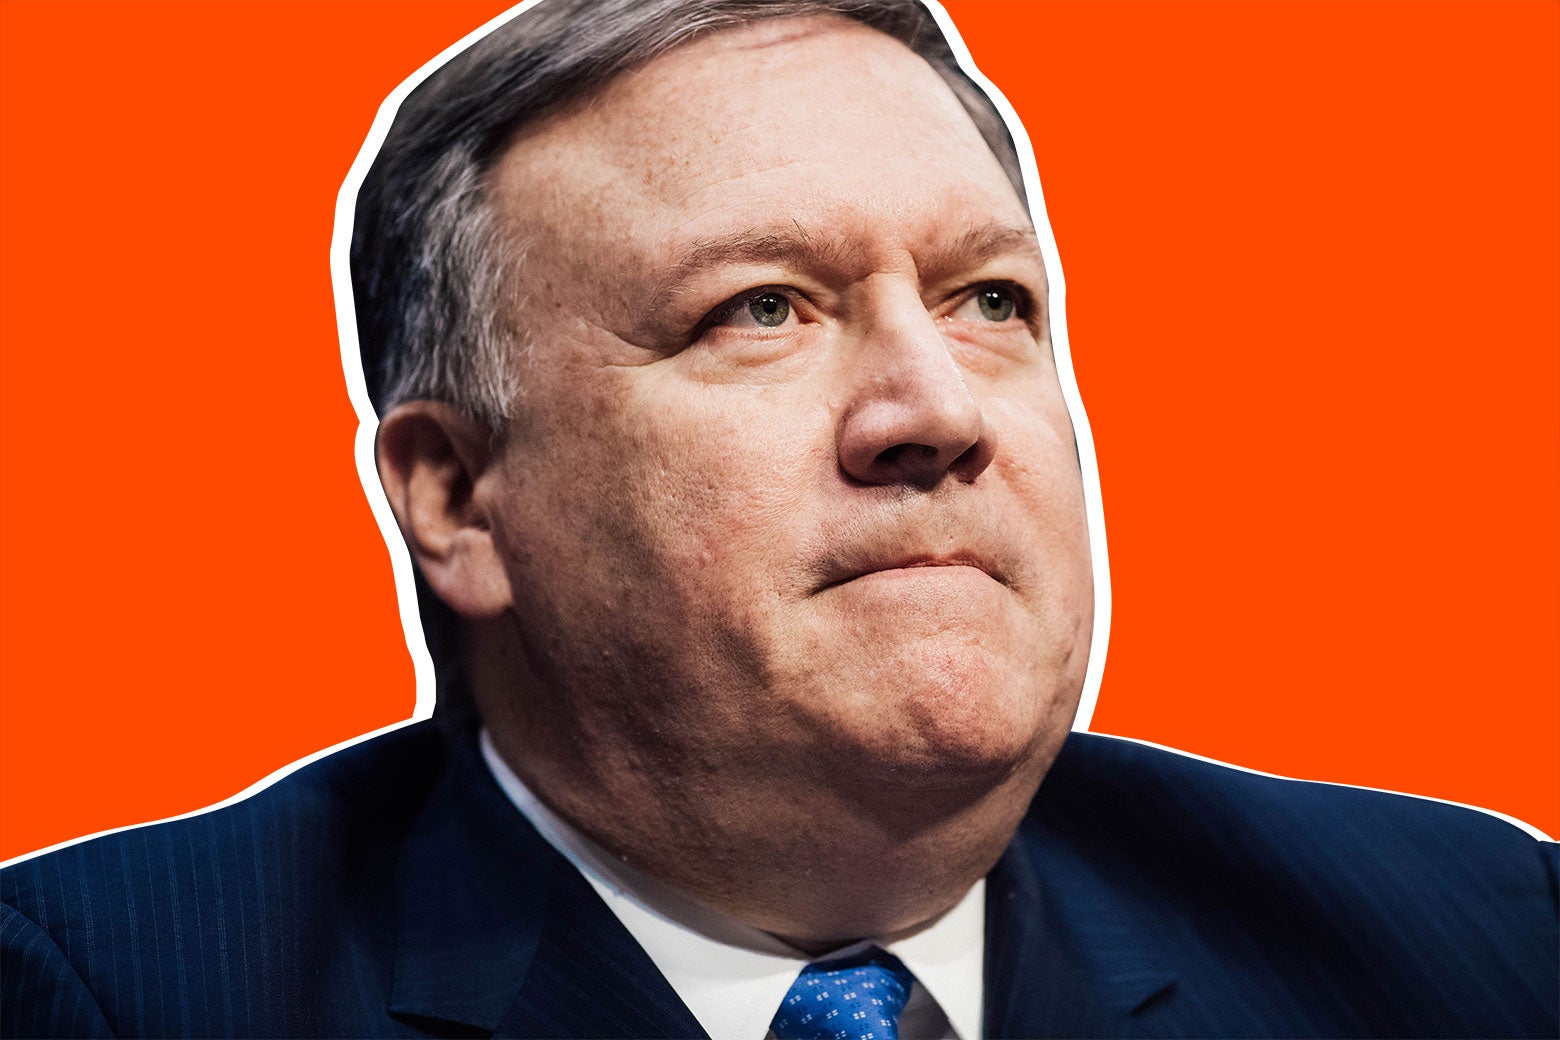 CIA Director Mike Pompeo testifies on worldwide threats during a Senate Intelligence Committee hearing on Capitol Hill in Washington on Feb. 13.